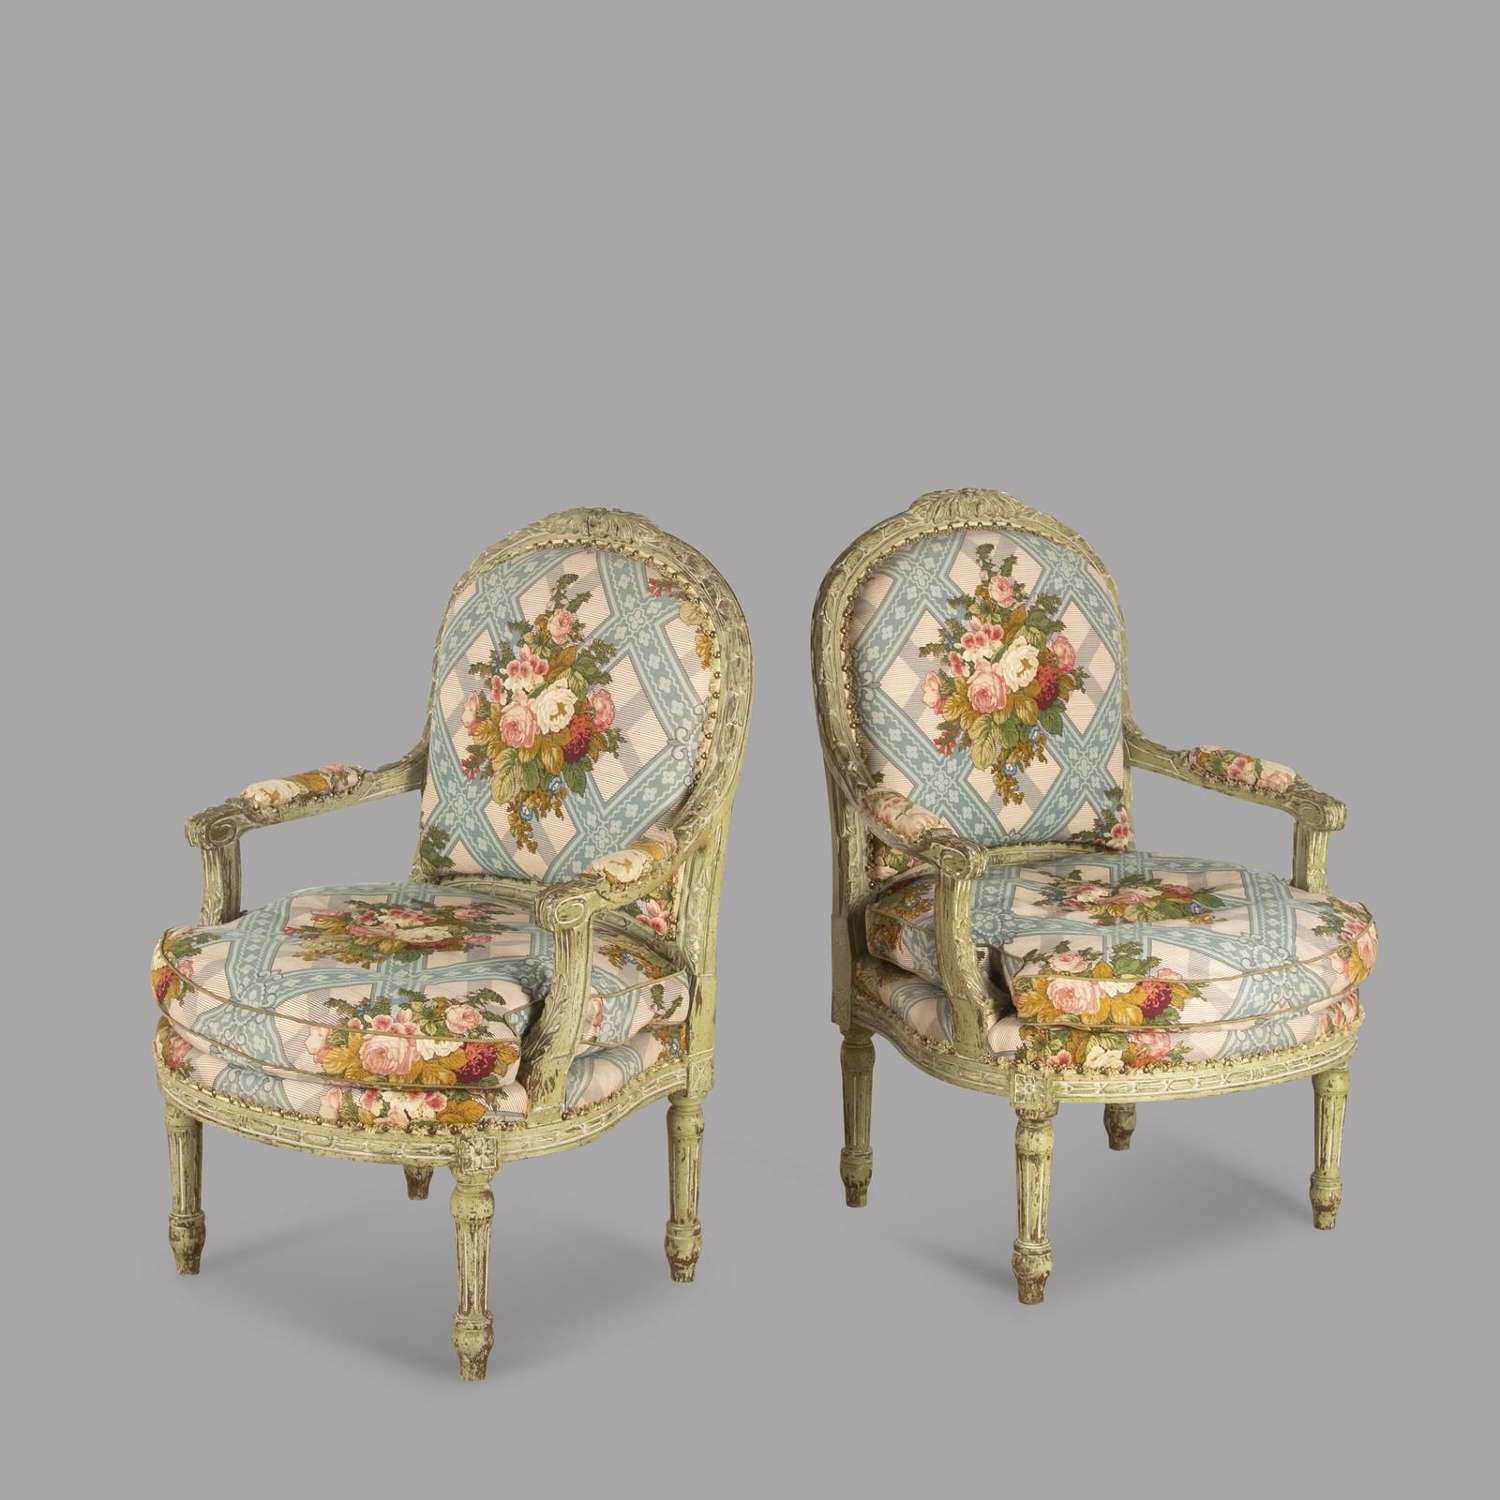 Pair of Louis XVI Style Green Painted Fauteuils